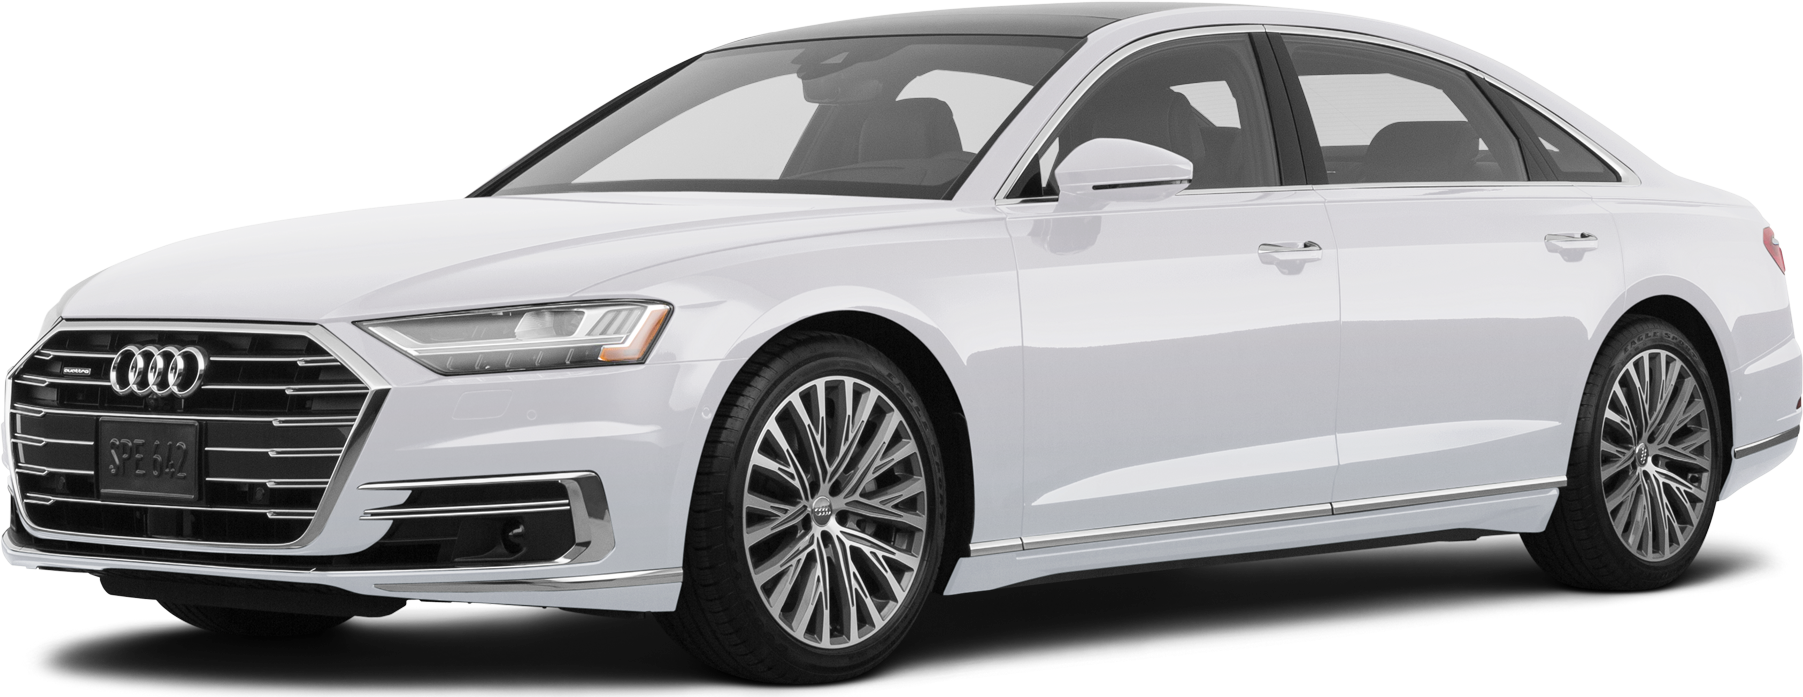 https://file.kelleybluebookimages.com/kbb/base/evox/CP/13240/2020-Audi-A8-front_13240_032_1803x697_2Y2Y_cropped.png